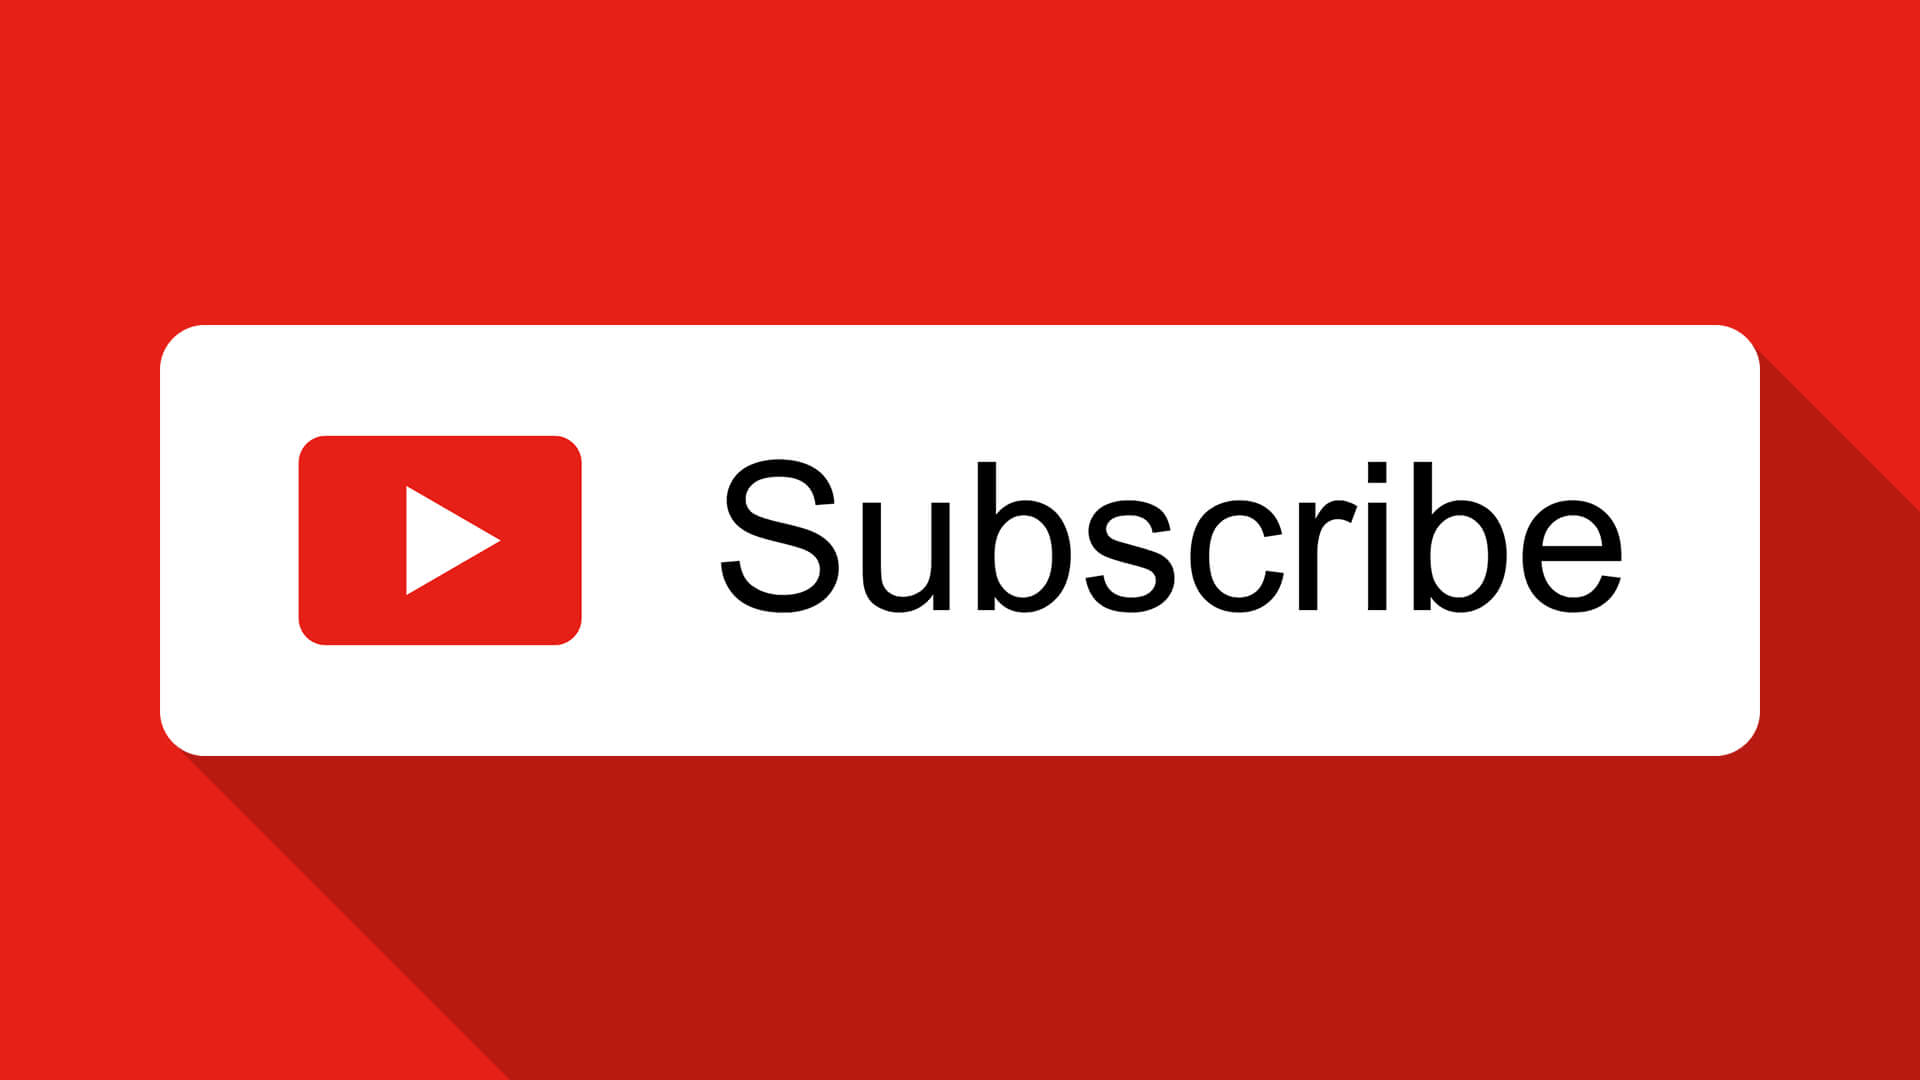 Free-YouTube-Subscribe-Button-Download-Design-Inspiration-By-AlfredoCreates-2